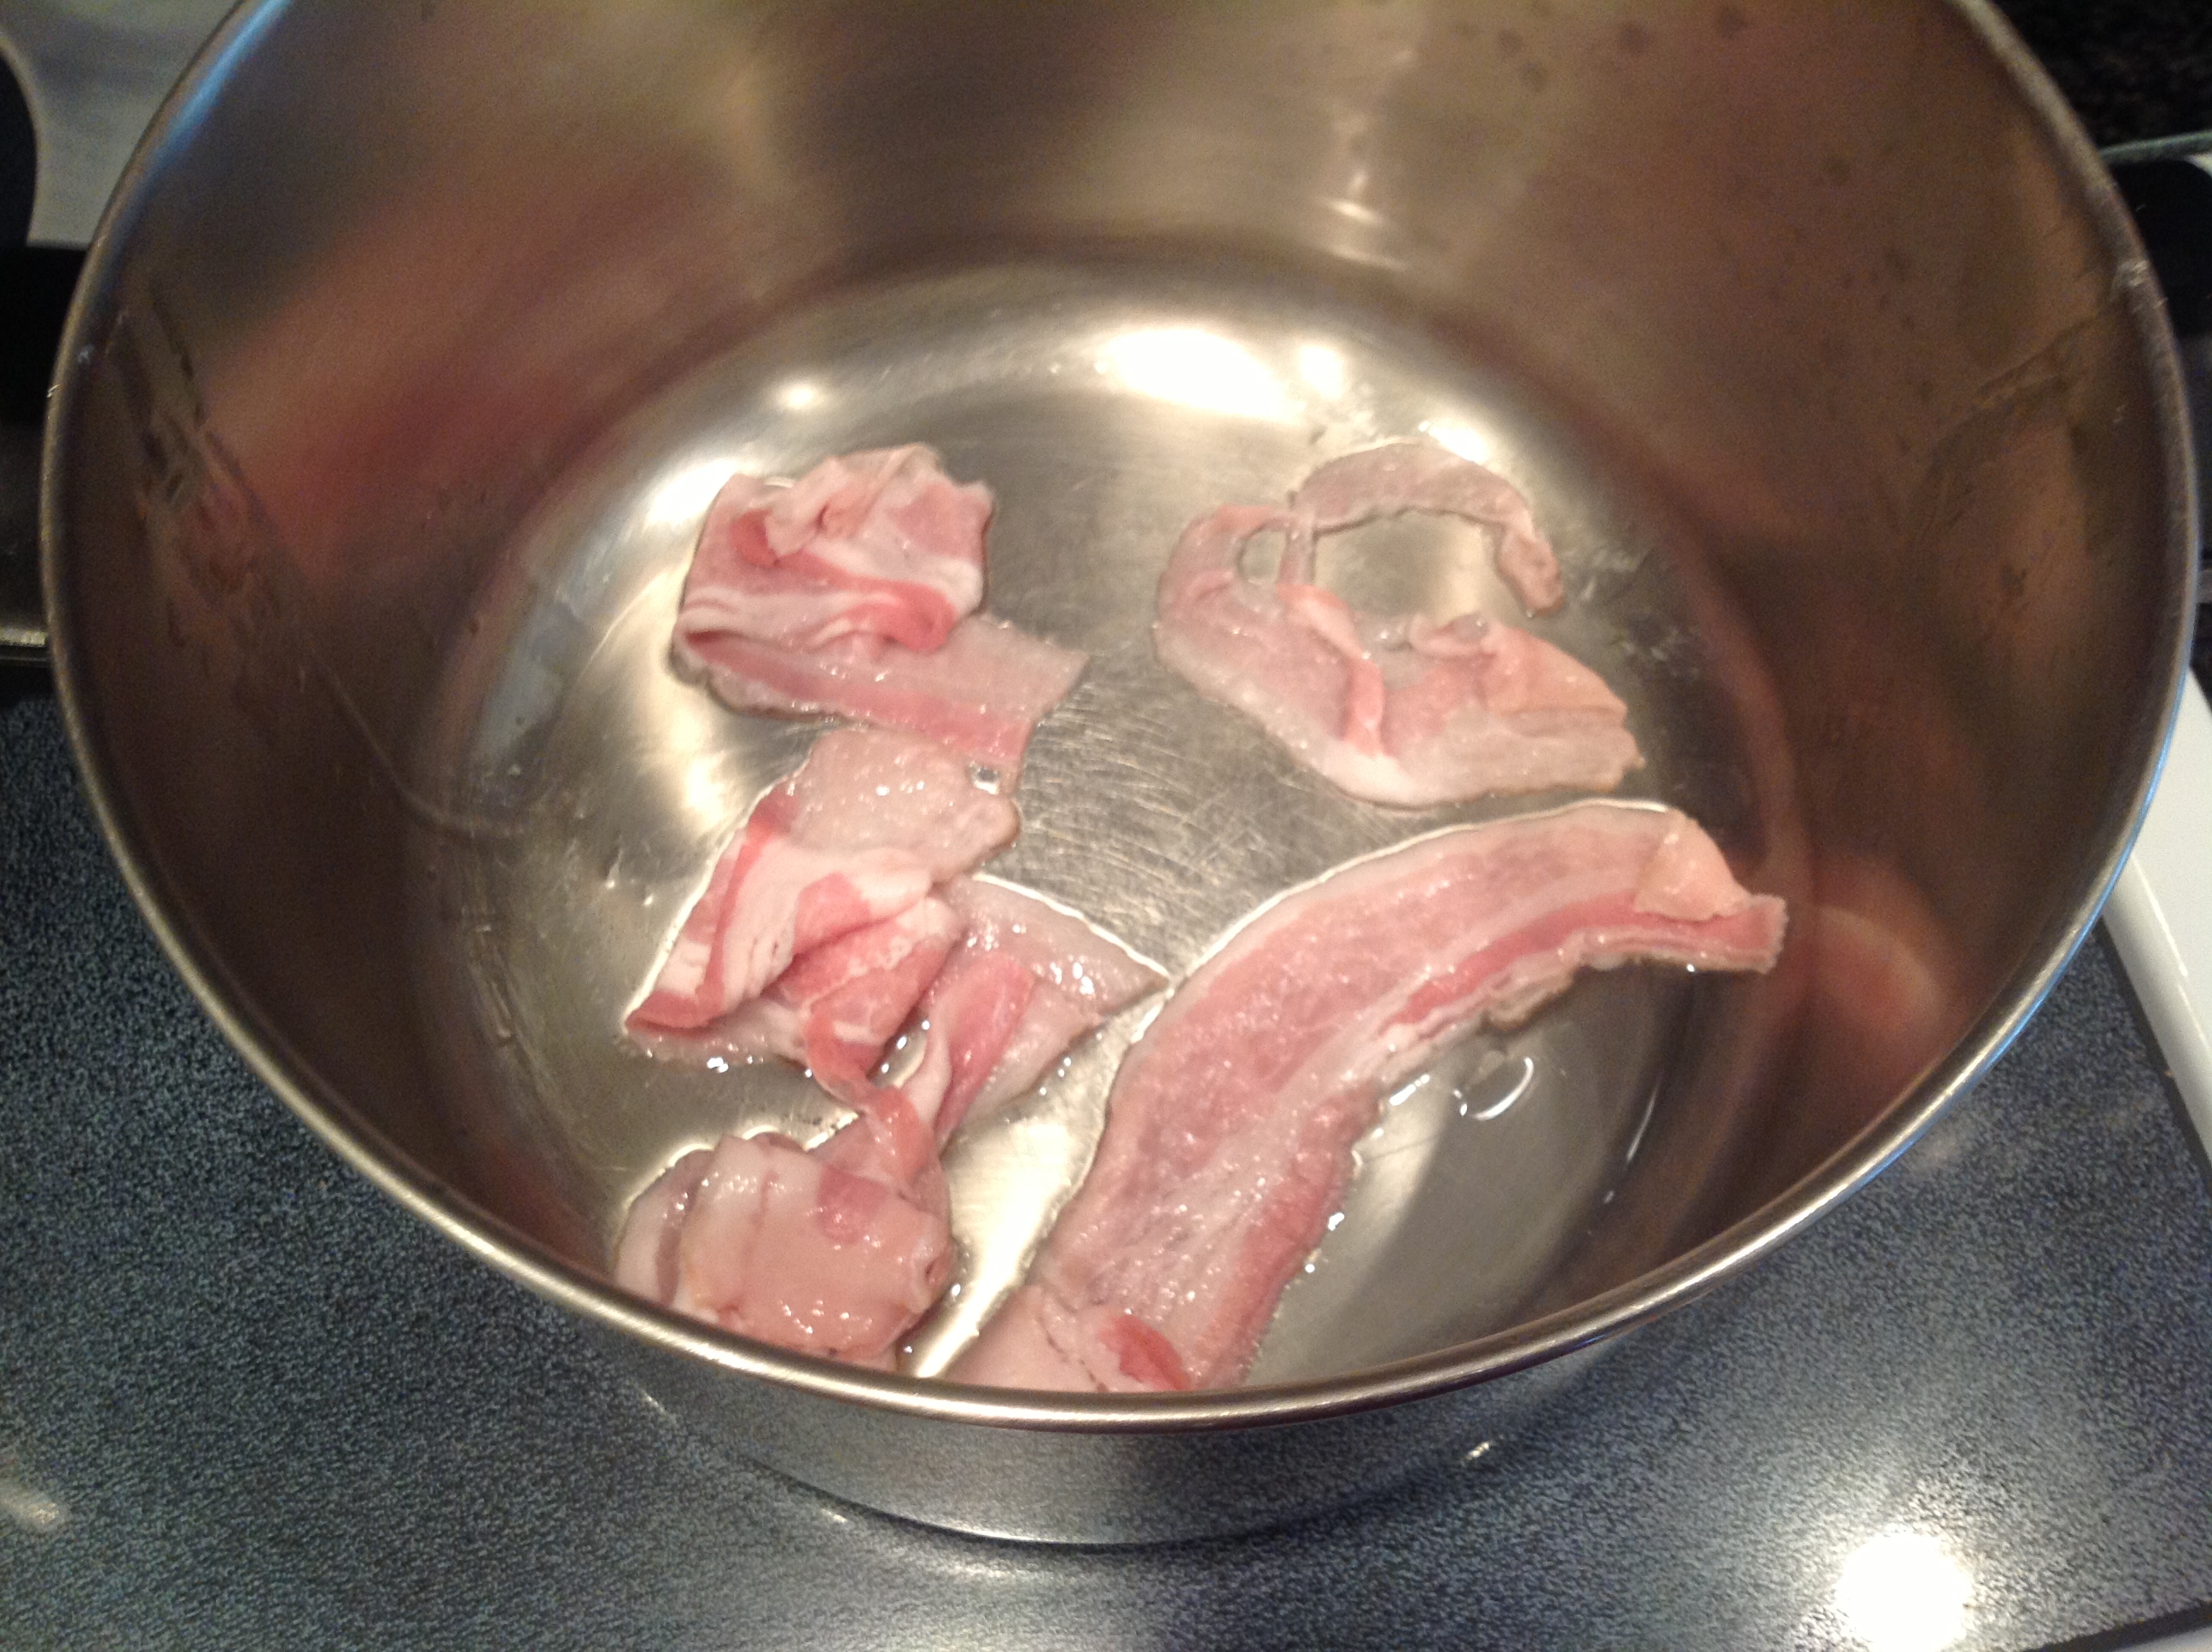 Fying bacon up in a pan